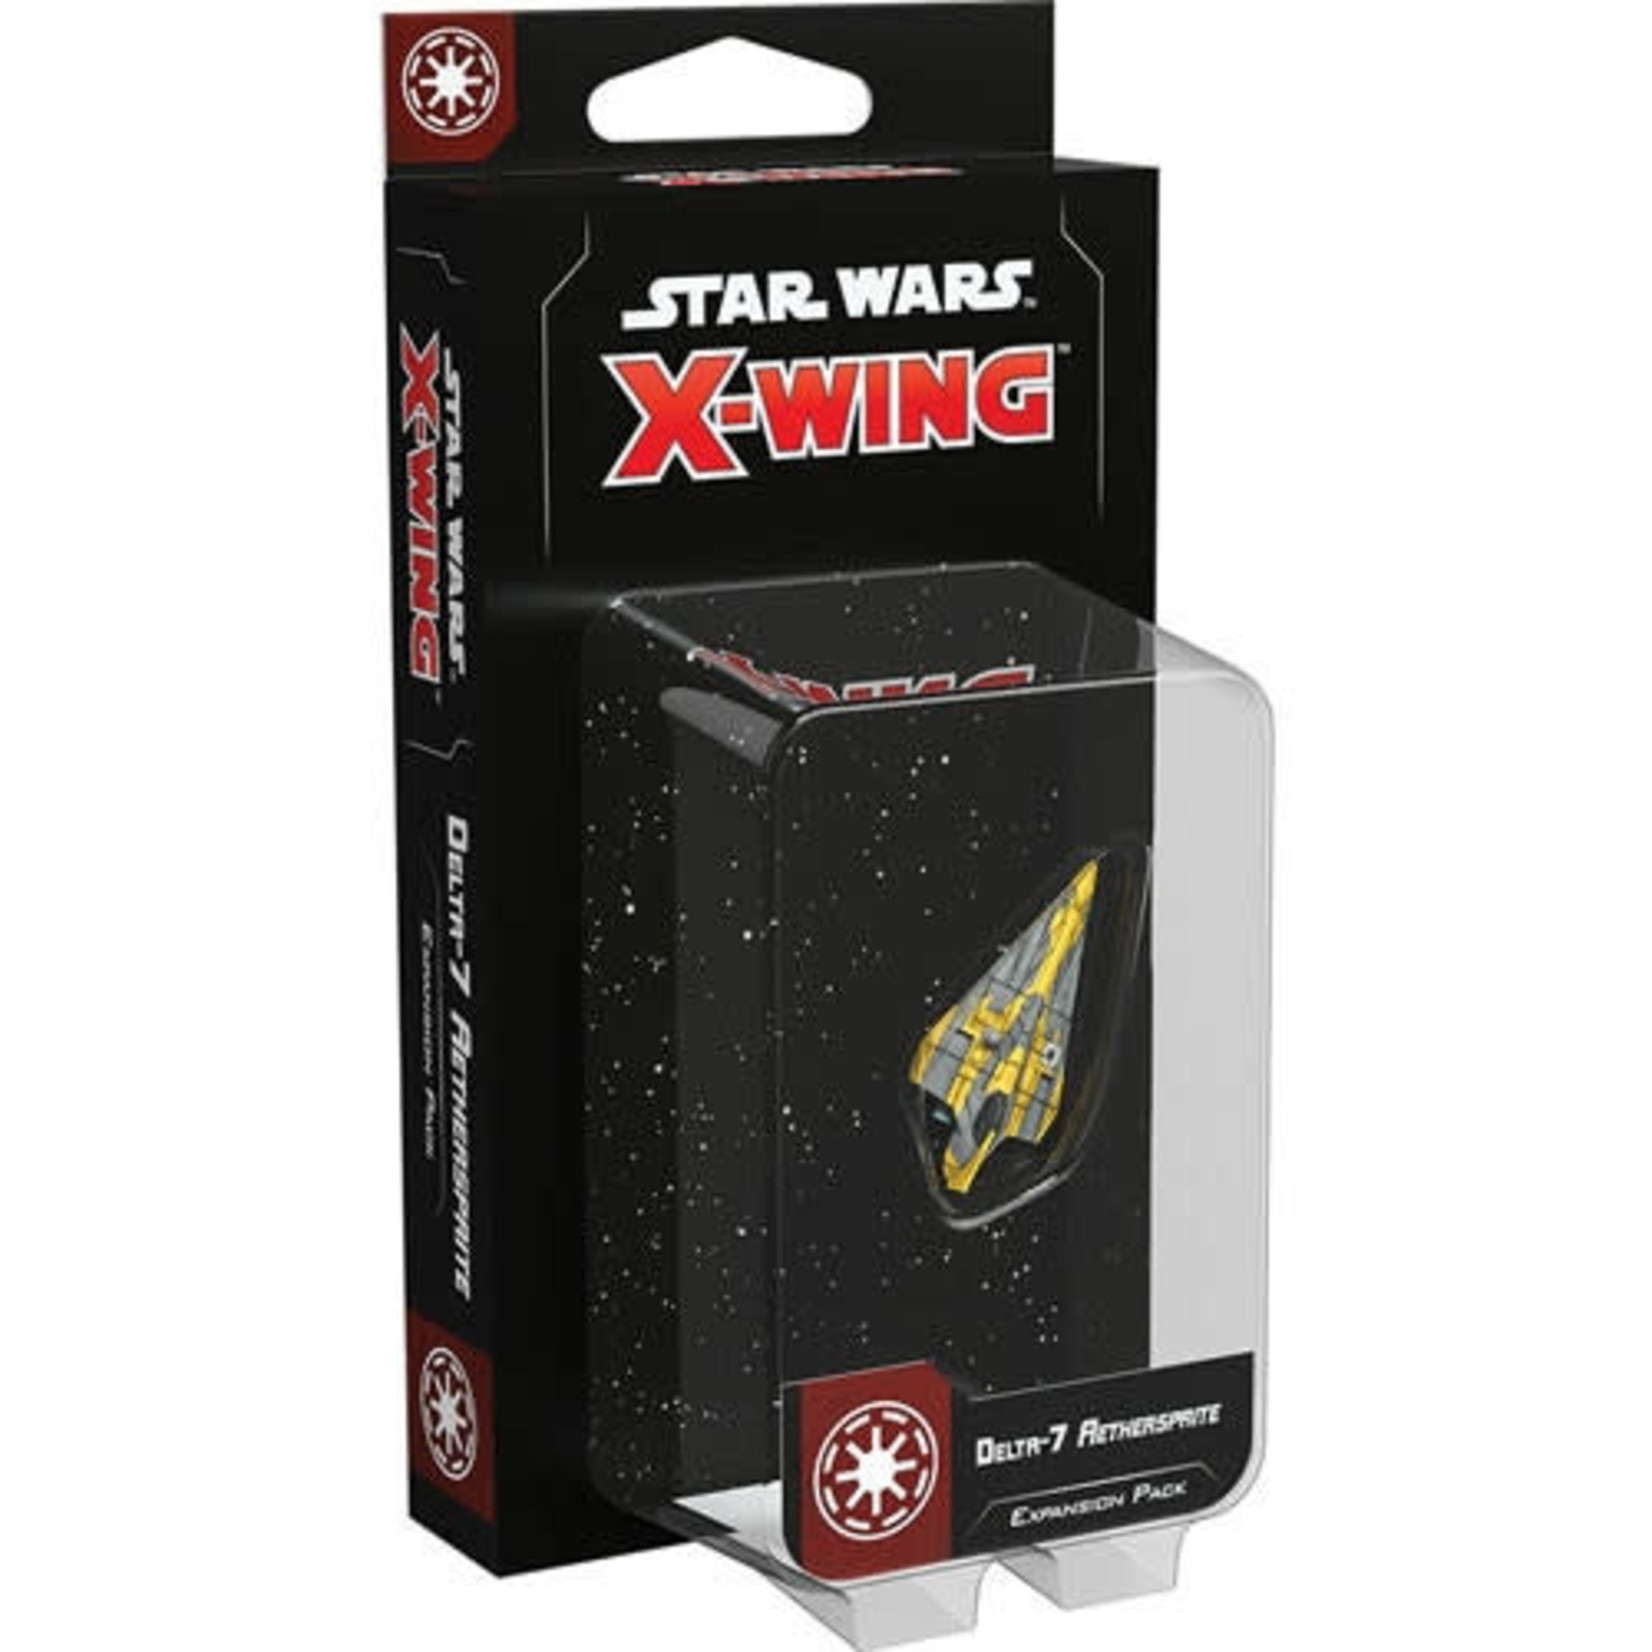 Star Wars X-Wing 2e: Delta-7 Aethersprite Expansion Pack